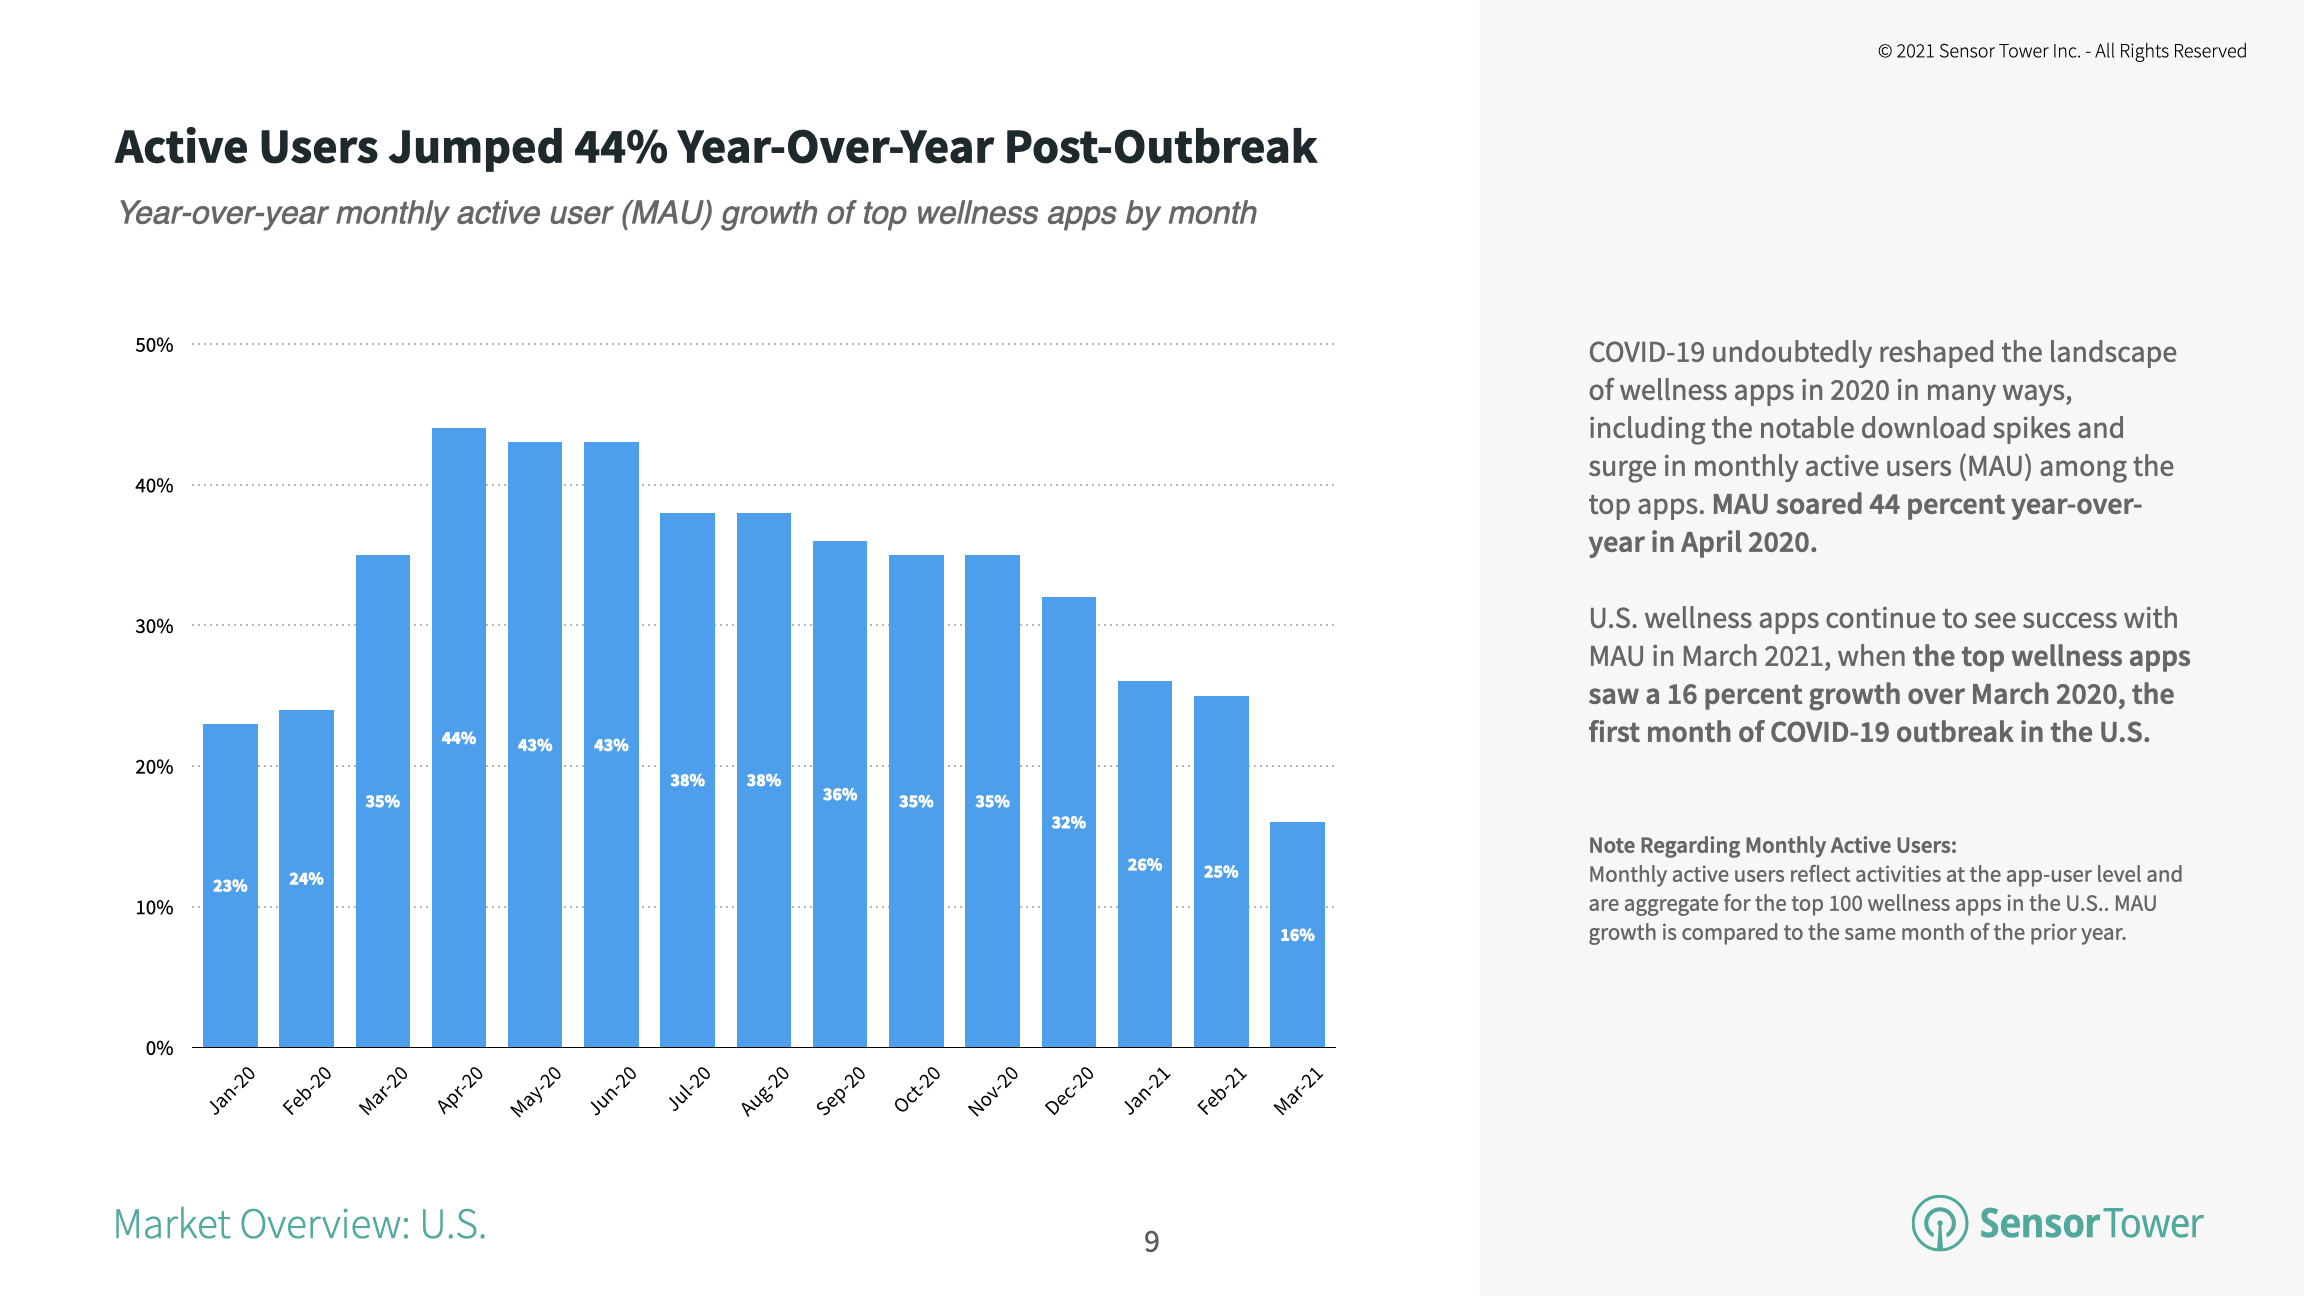 Monthly active user growth of the top U.S. wellness apps remains elevated, though not as much as at the onset of the pandemic in April 2020.